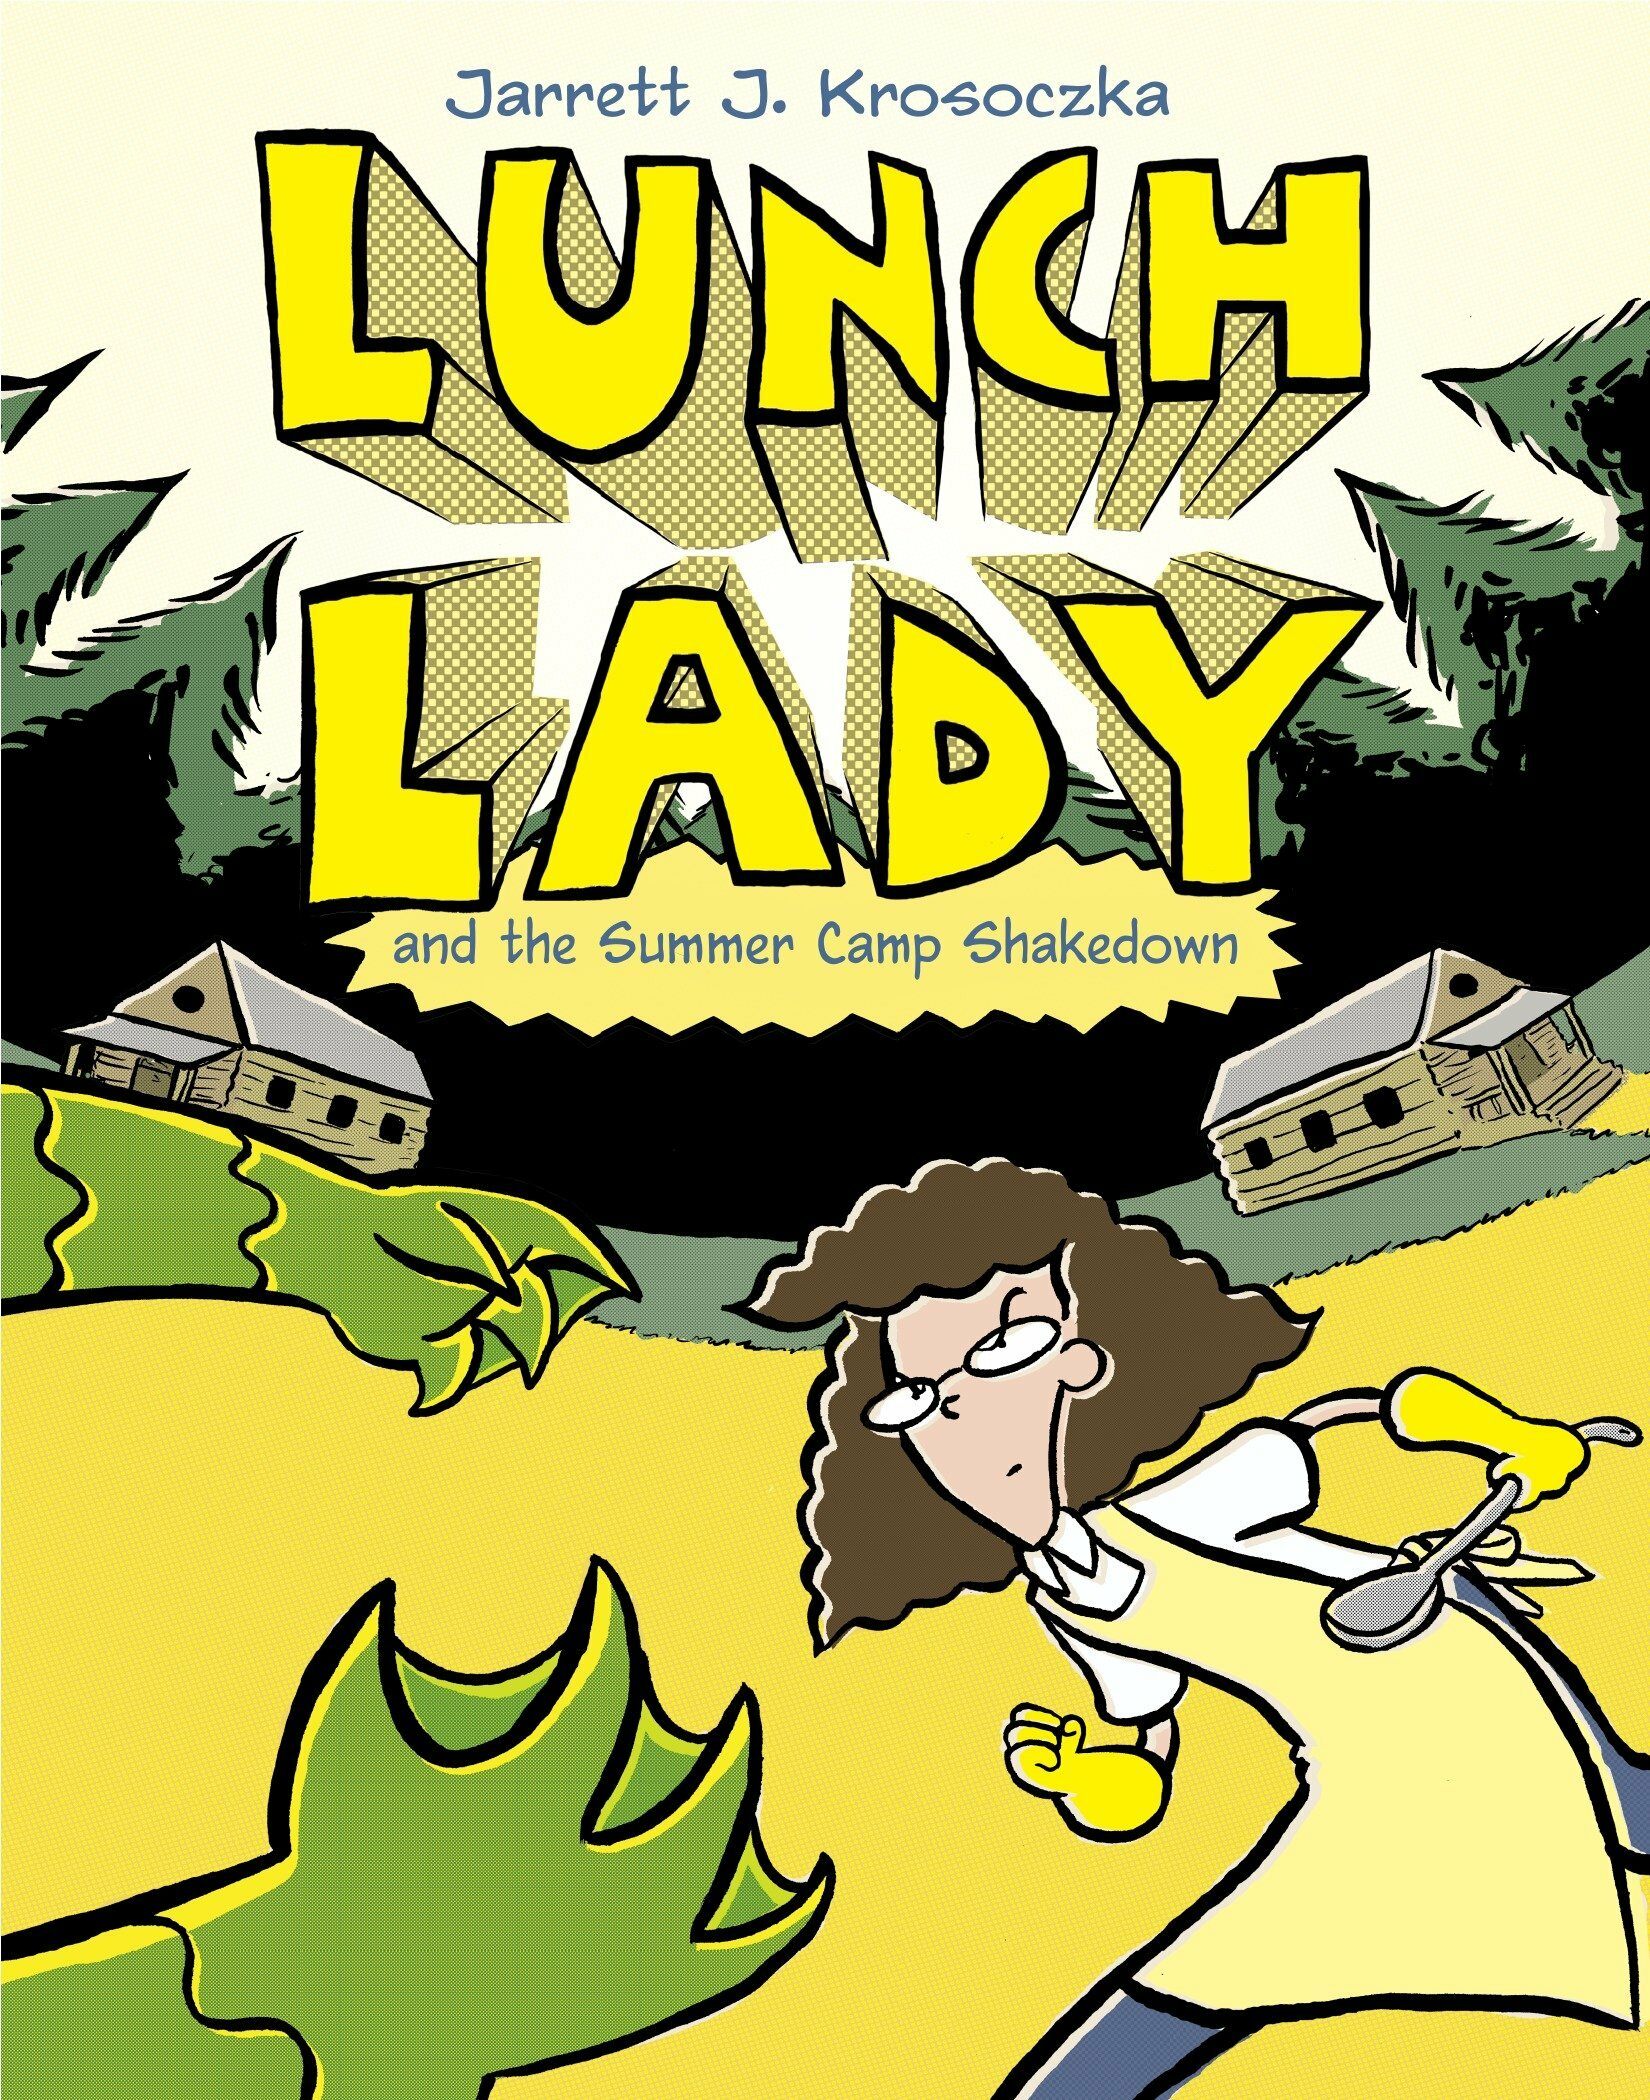 Lunch Lady and the Summer Camp Shakedown: Lunch Lady #4 (Paperback)